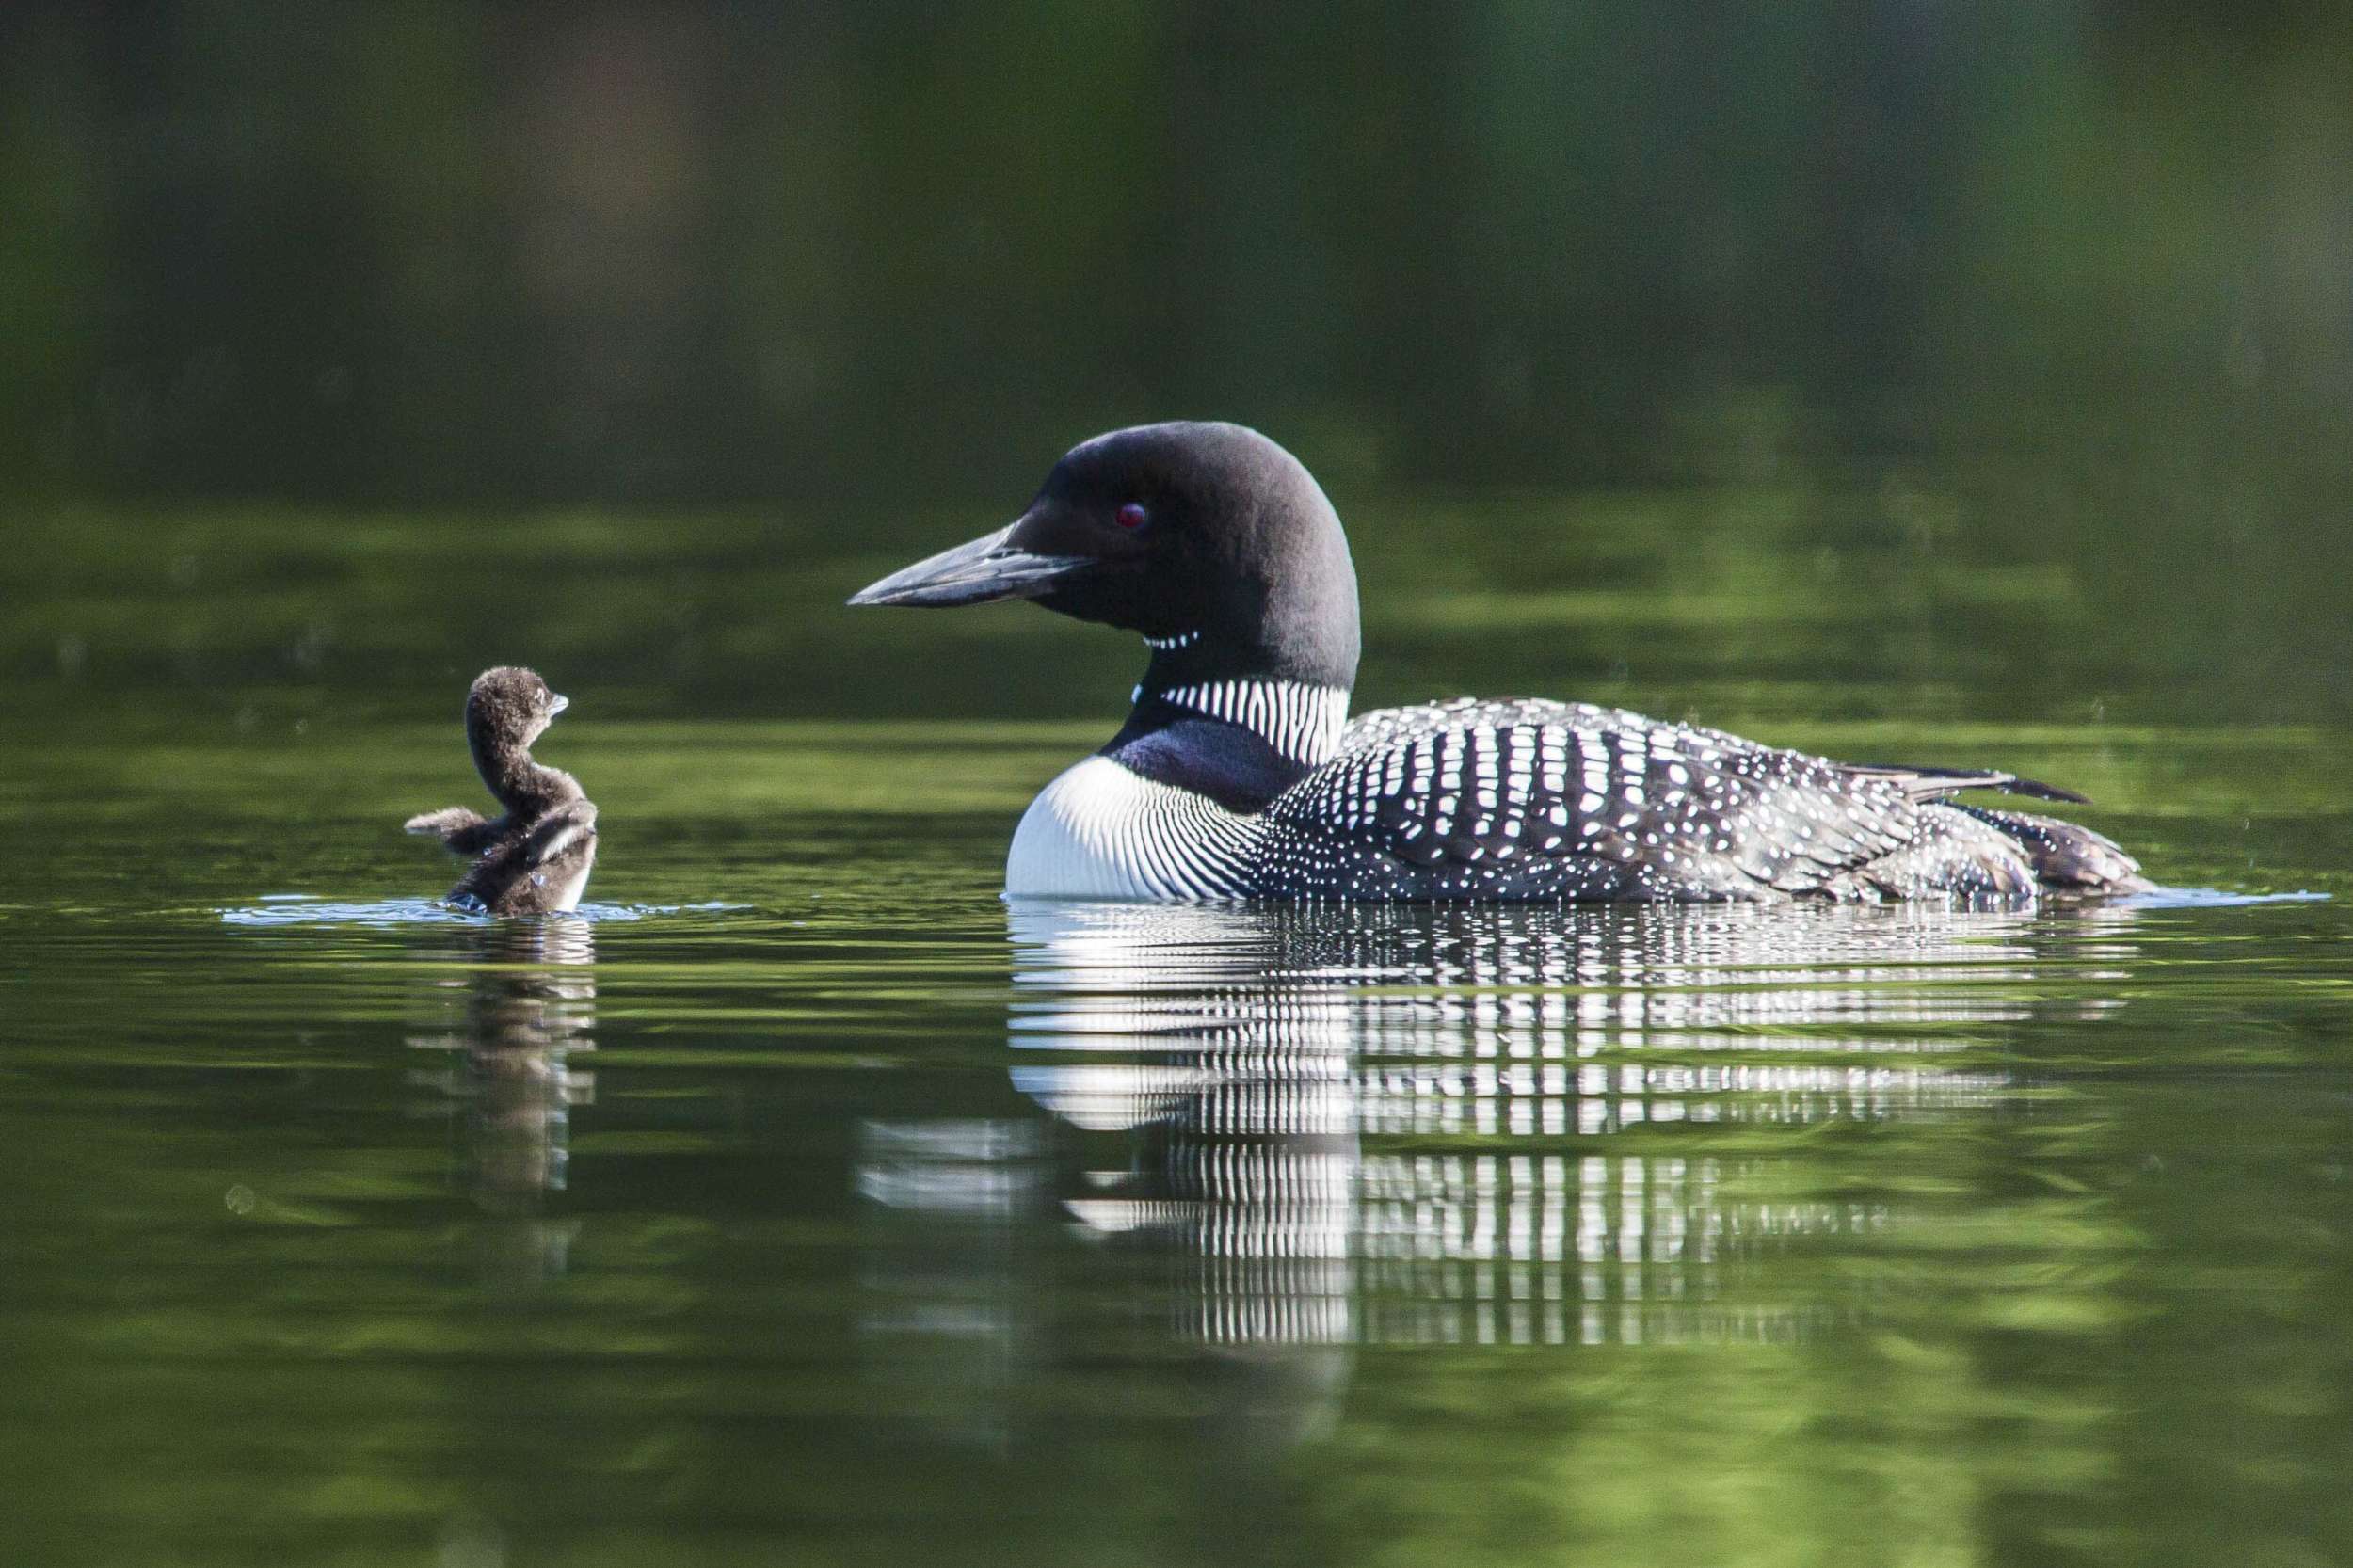 press release – VCE Receives Major Funding for Loon Conservation